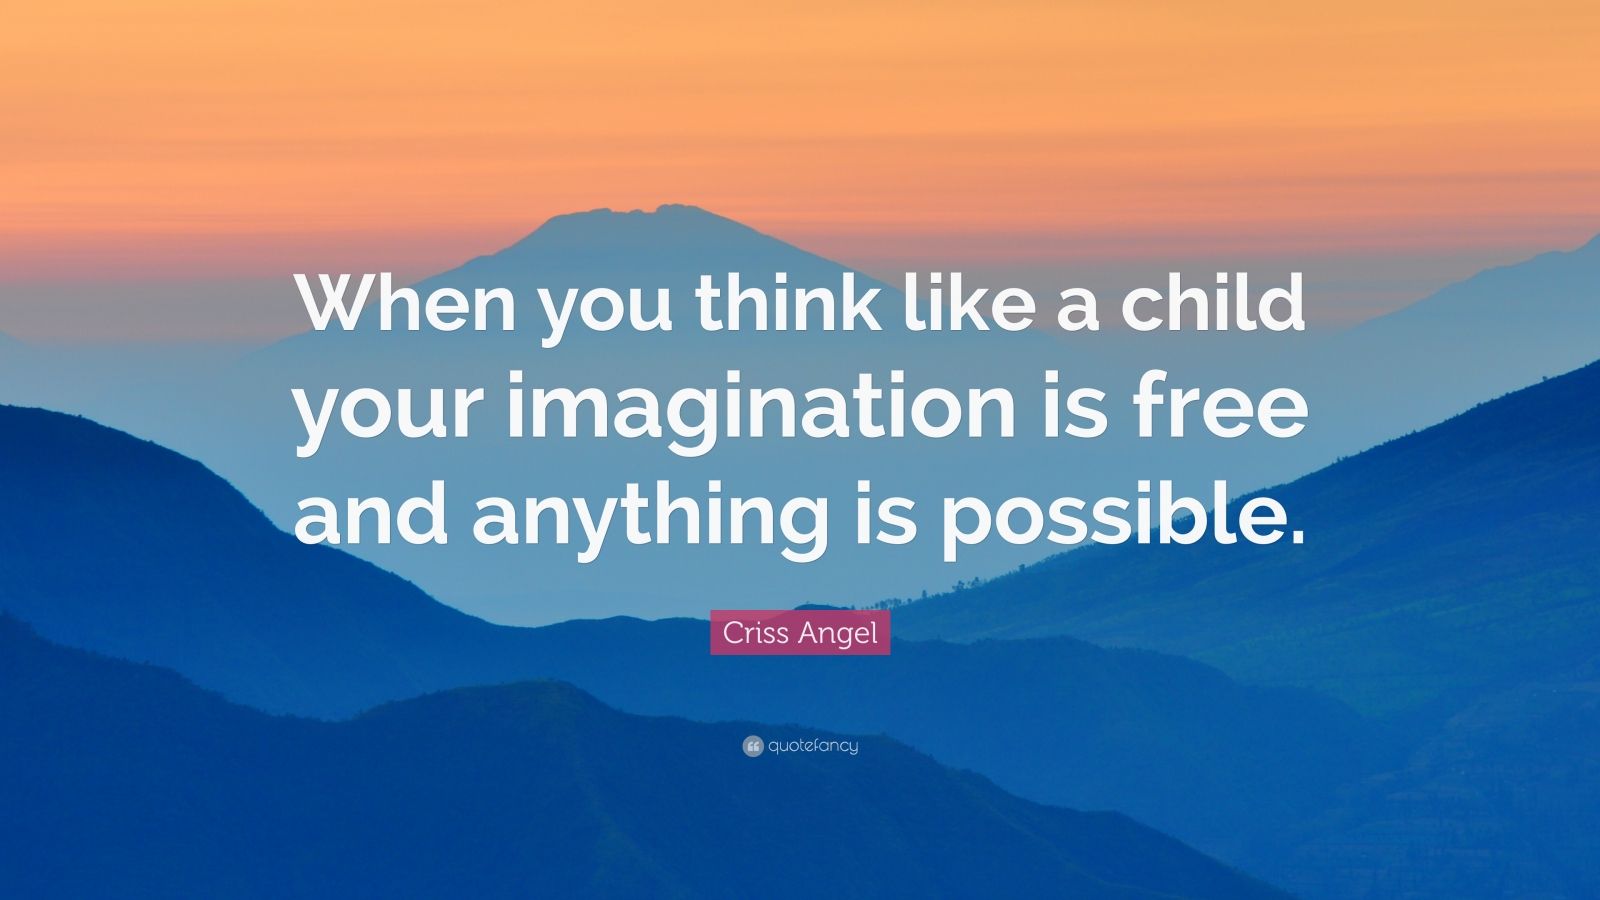 Criss Angel Quote: “When you think like a child your imagination is